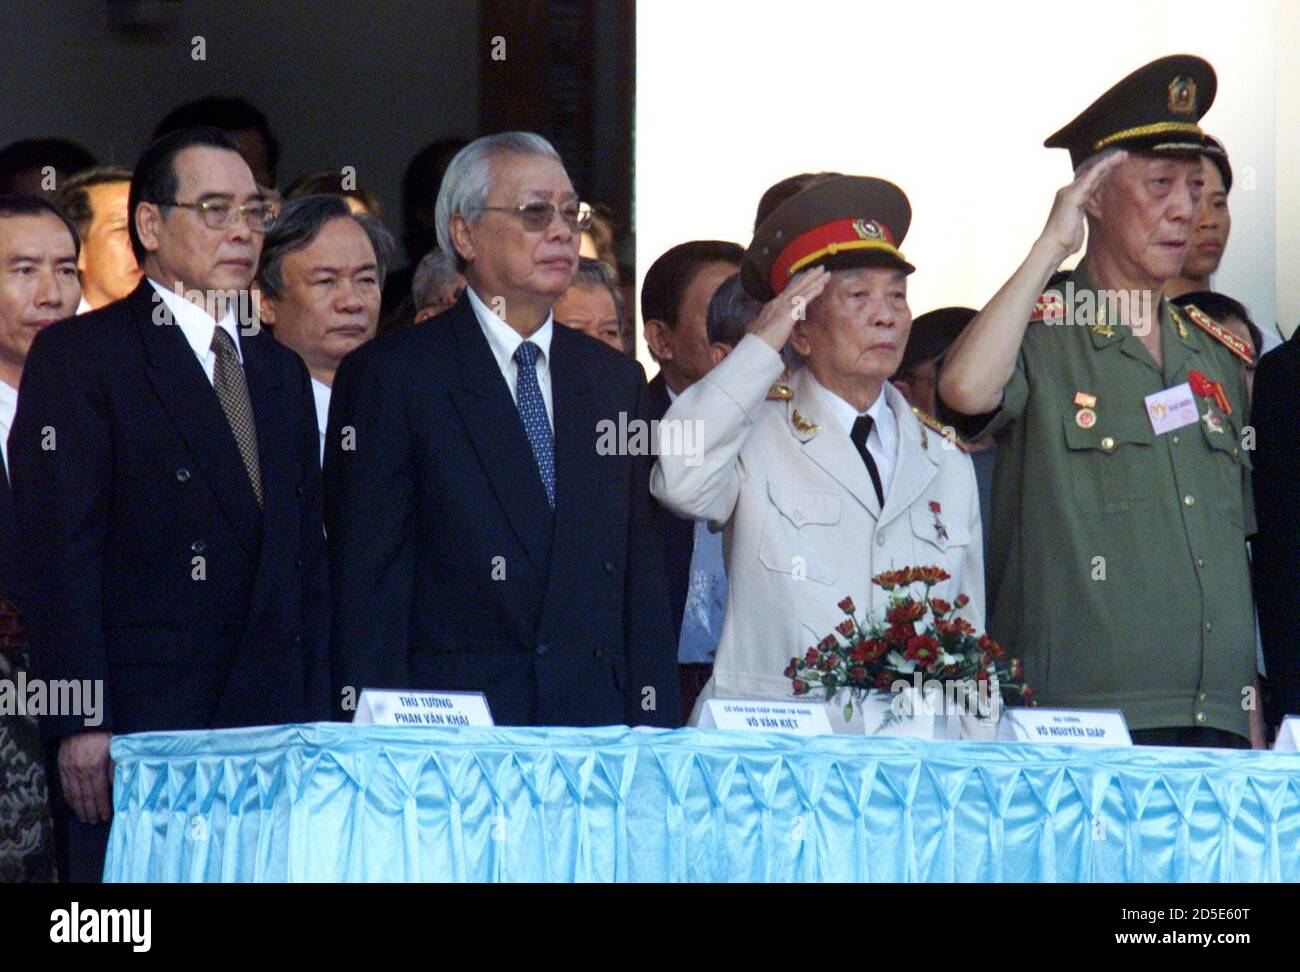 Vietnamese leaders (L-R) Prime Minister Phan Van Khai, former Prime  Minister Vo Van Kiet, Vietnam War architect General Vo Nguyen Giap, and  former Interior Minister Mai Chi Tho attend a parade commemorating